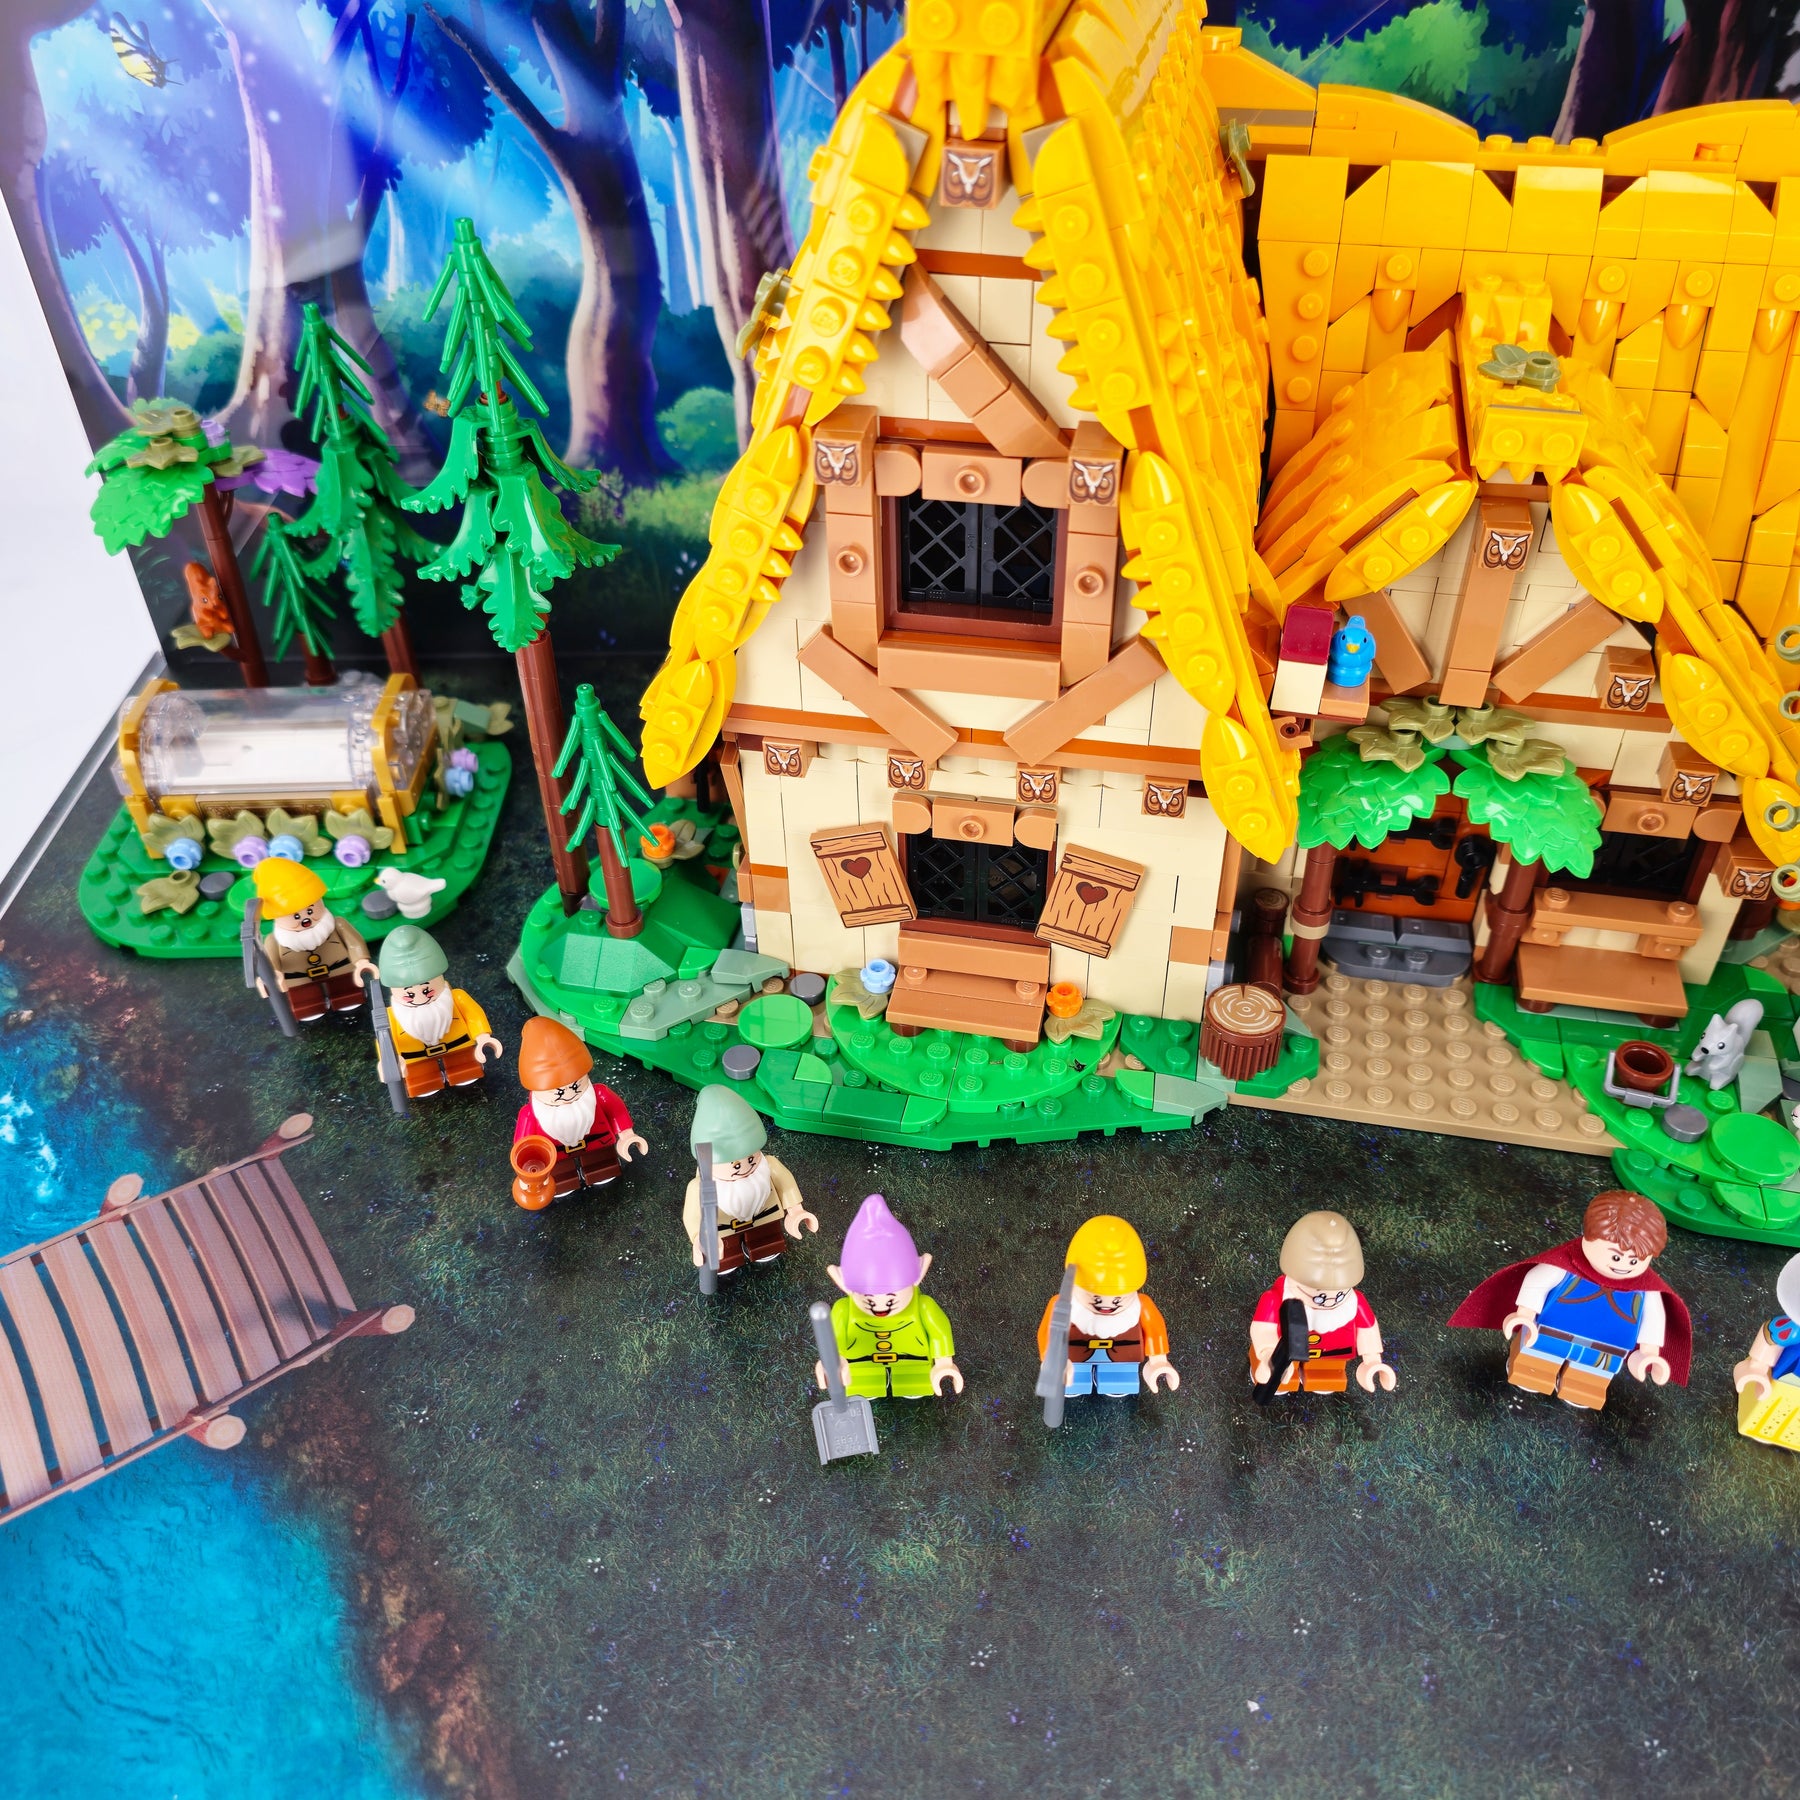 Lego 43242 Snow White and the Seven Dwarfs' Cottage - Display Case